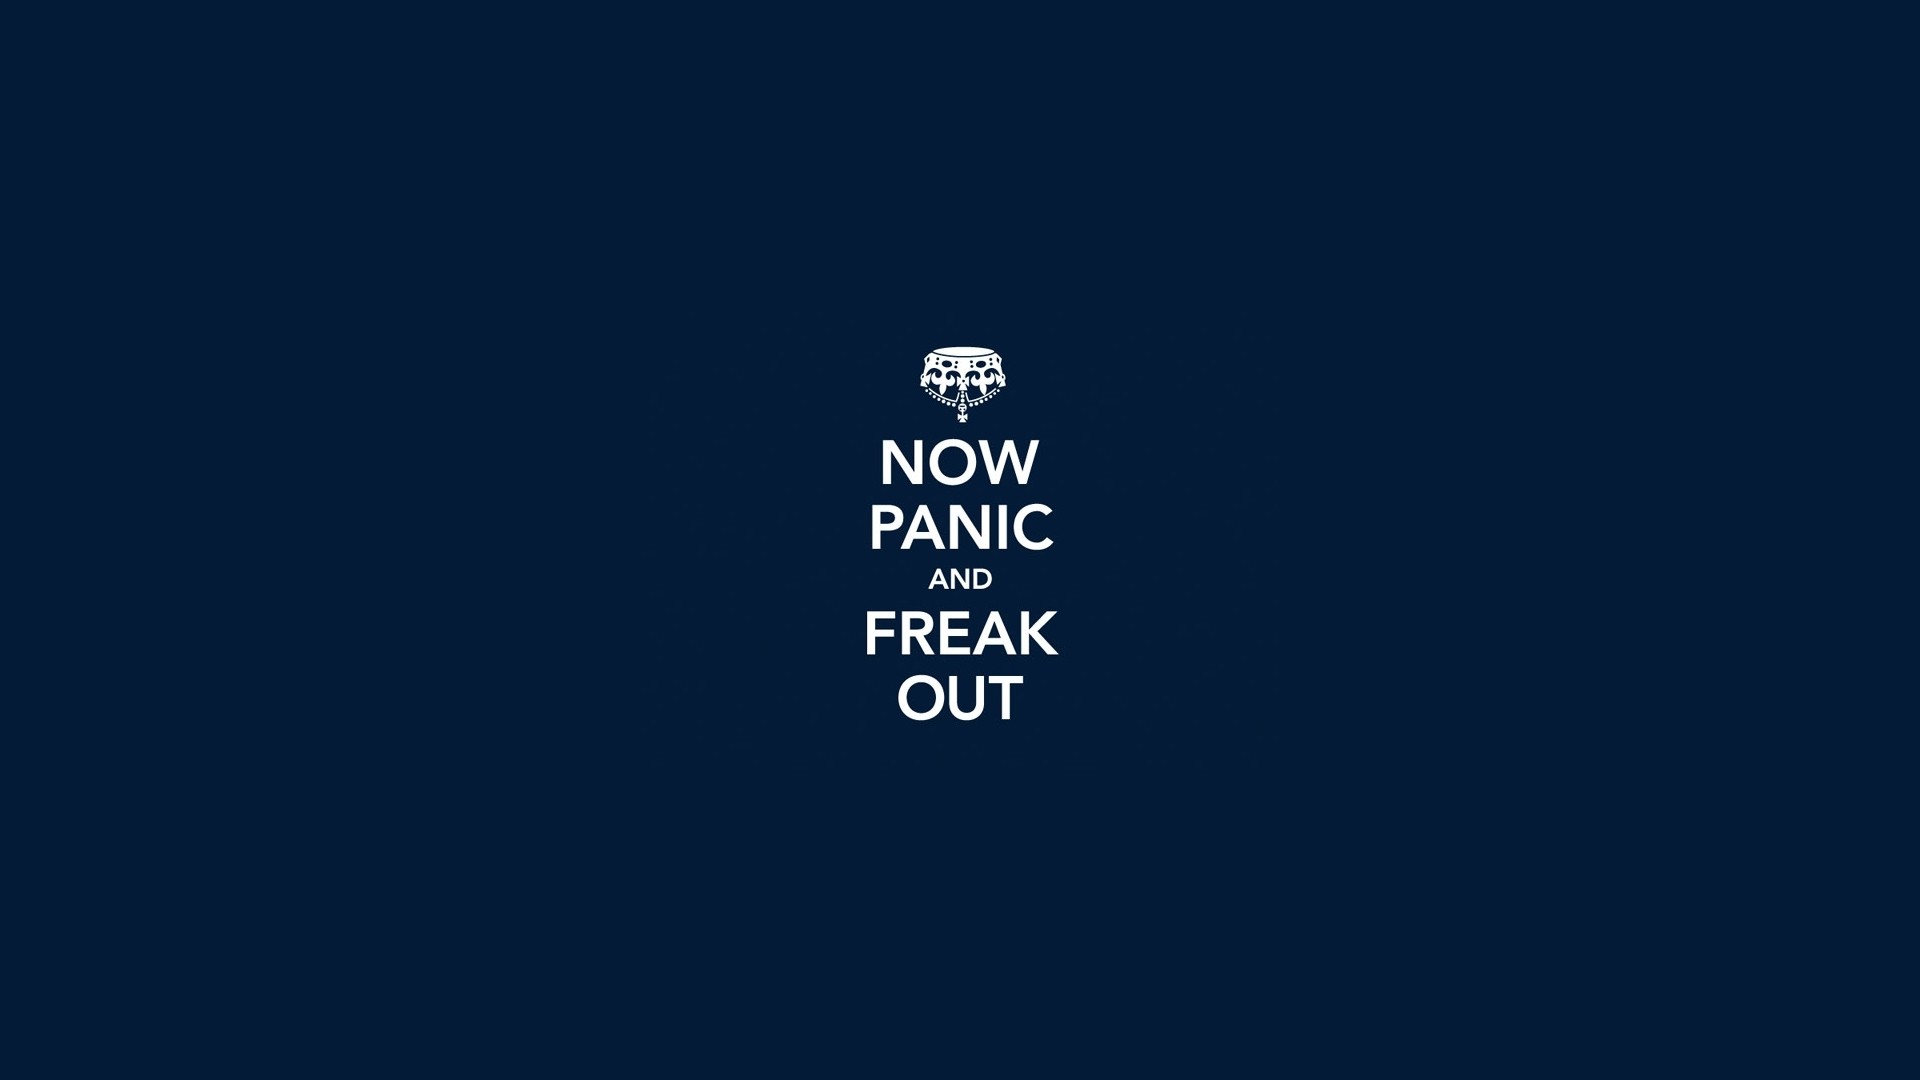 Keep calm and carry on wallpaper Now panic and freak out humor funny